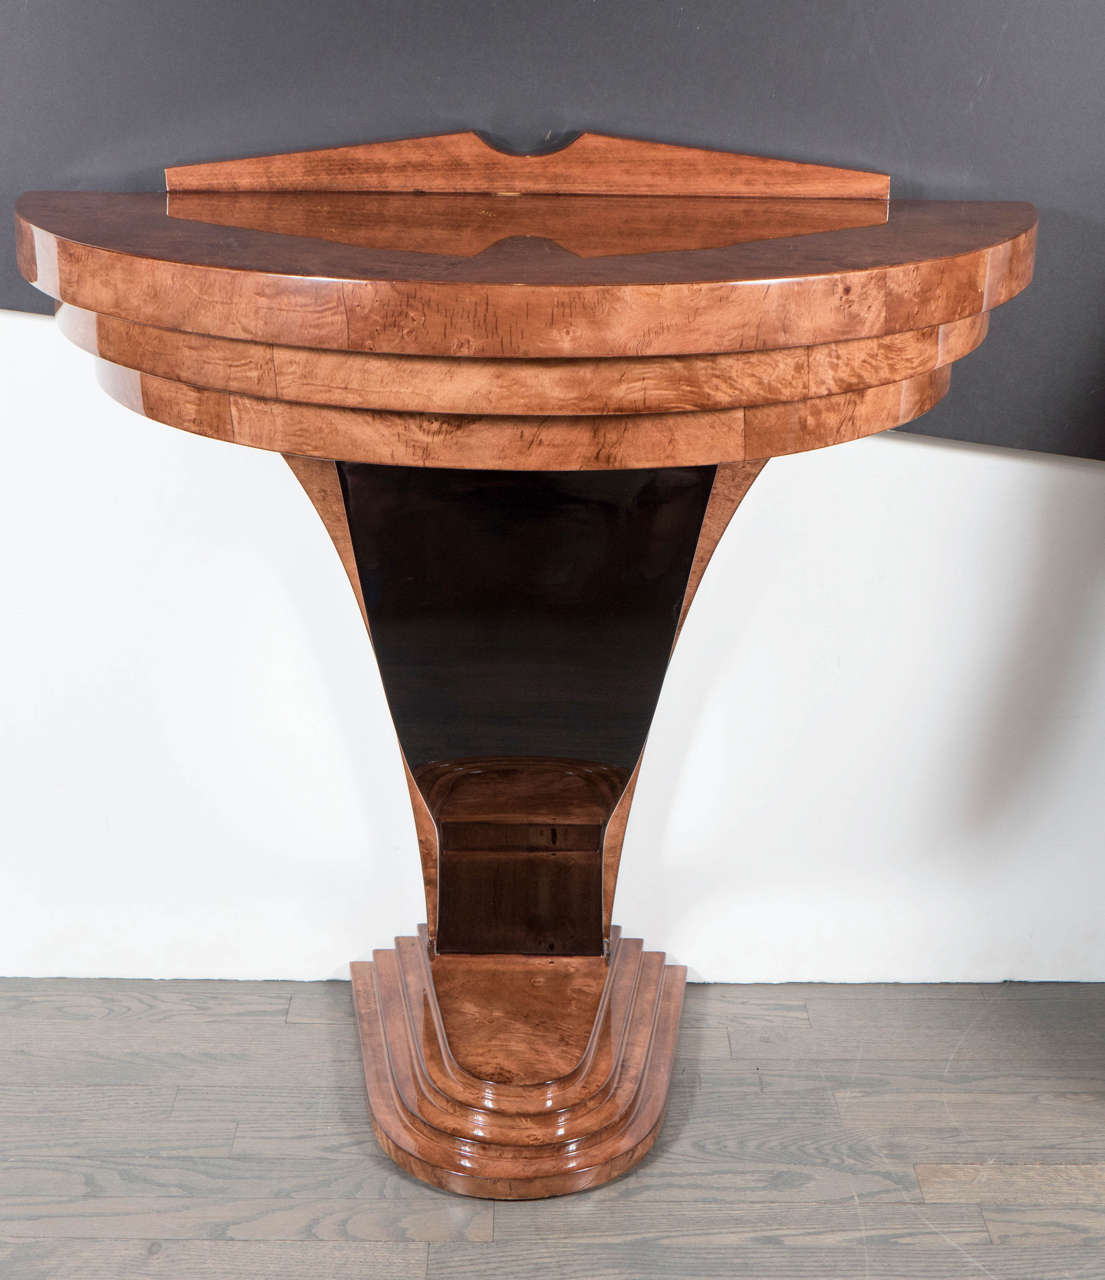 This stunning Machine Age Art Deco console was realized in the United States, circa 1935. Executed in bookmatched carpathian elm, it offers a demilune form skyscraper style base consisting of four stepped tiers from which a streamlined black lacquer